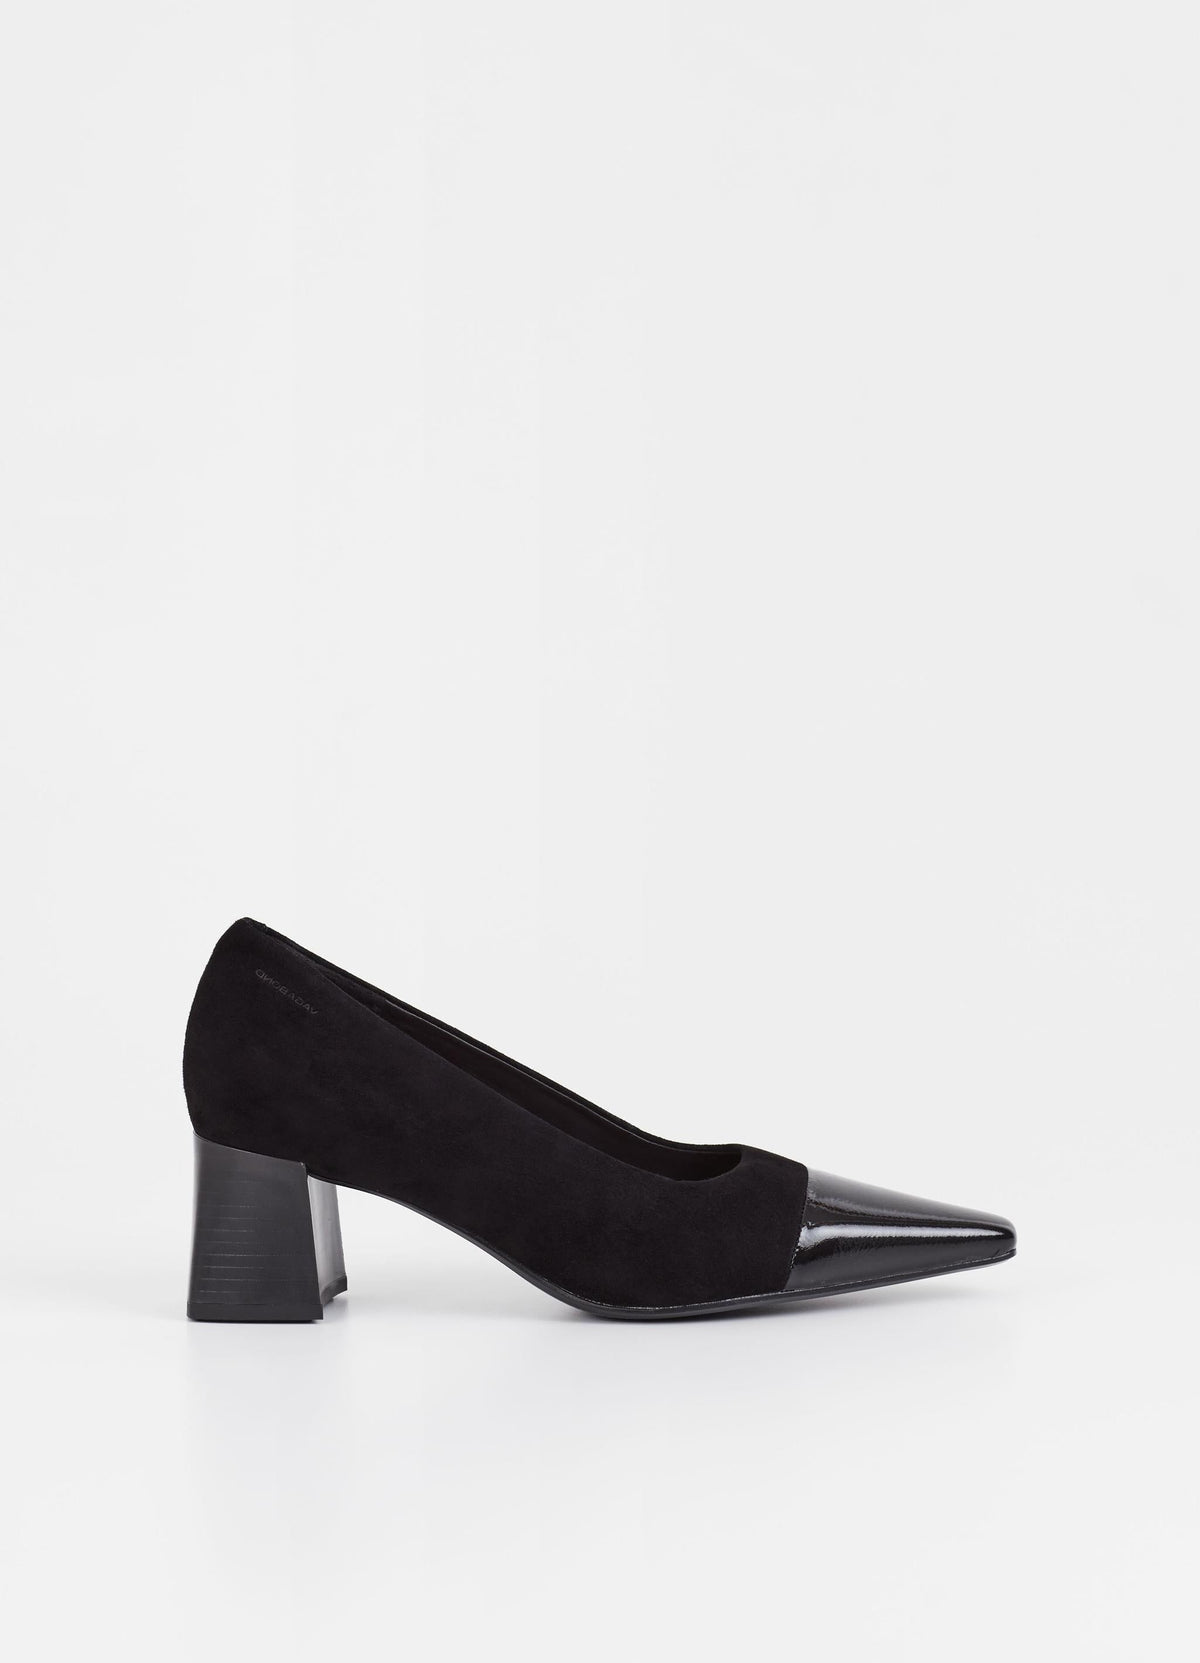 Black suede pumps with stacked black heel and pointed contrast black patent toe